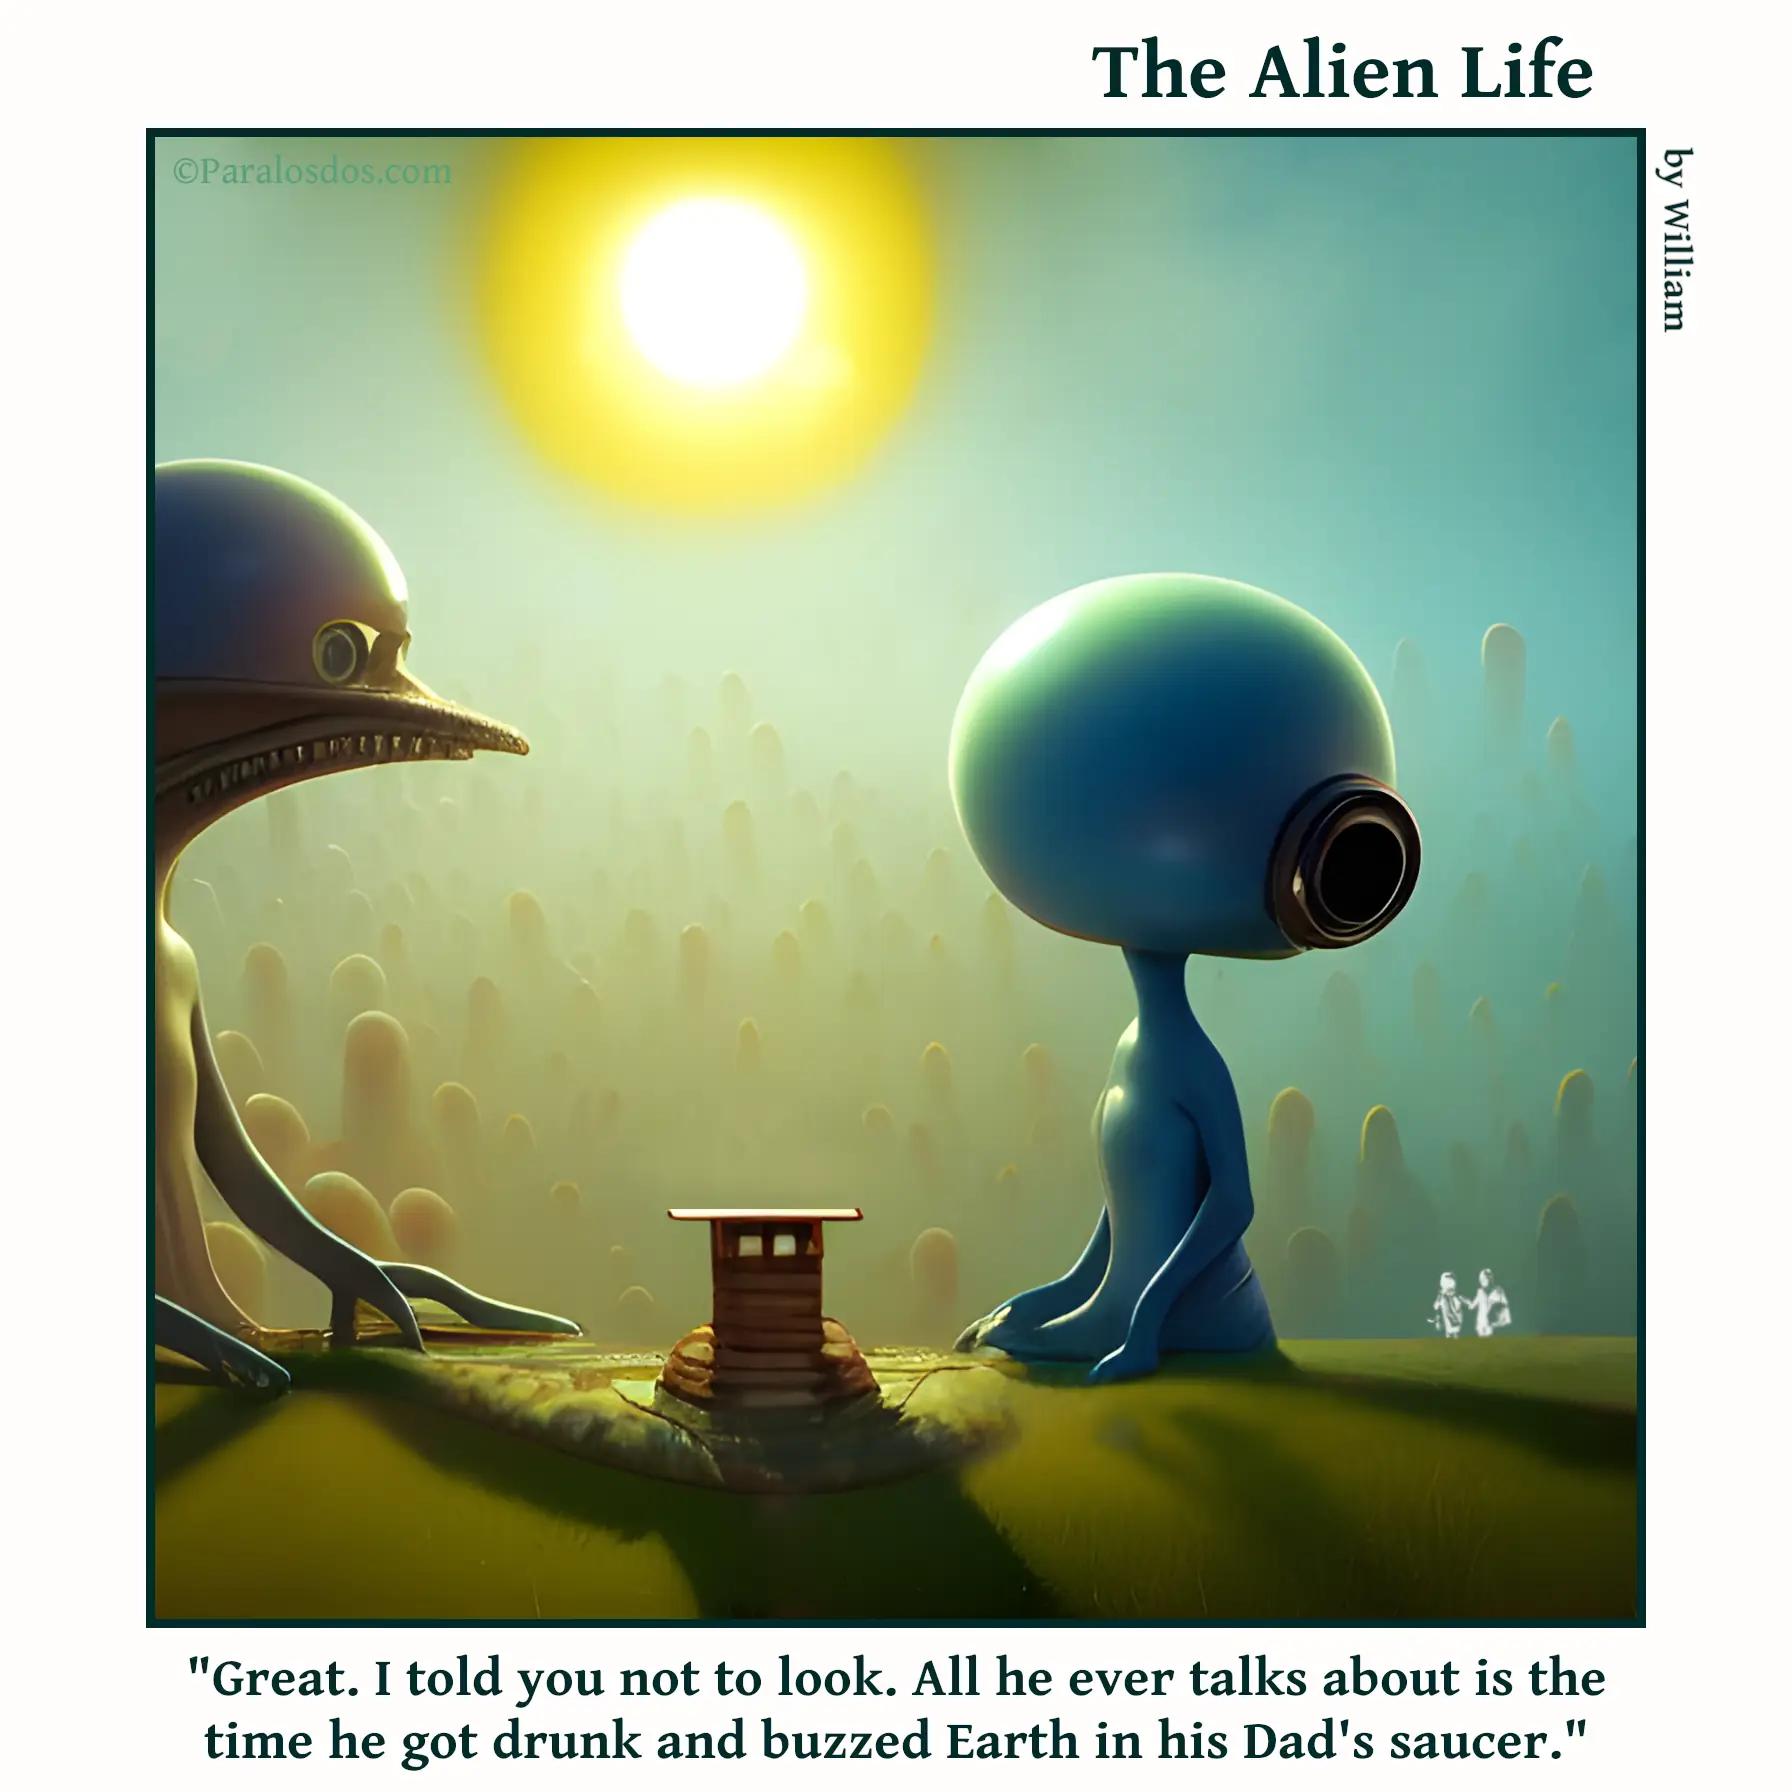 The Alien Life, one panel Comic. Two aliens are sitting at a bar. The caption reads: "Great. I told you not to look. All he ever talks about is the time he got drunk and buzzed Earth in his Dad's saucer."